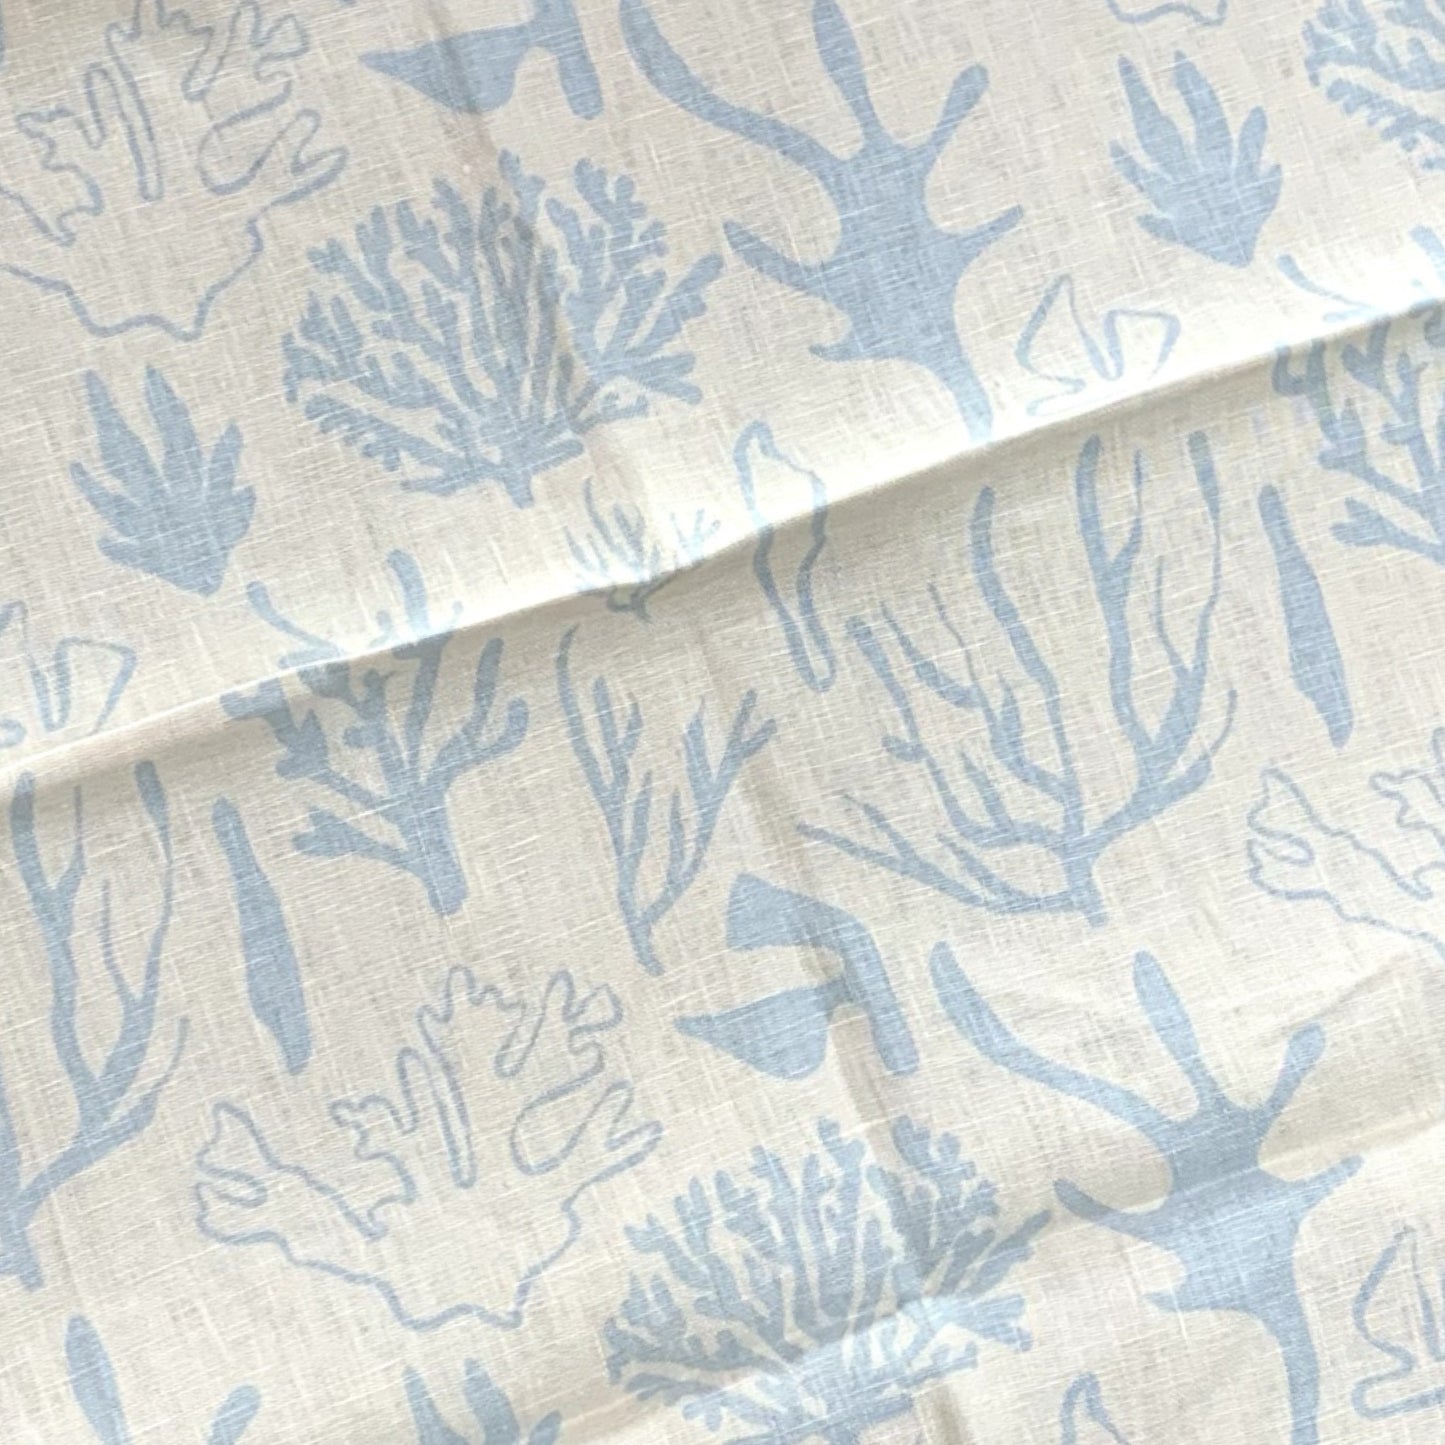 BRIGHT THREADS- The Coral Sea Tea Towel - CHAMBRAY